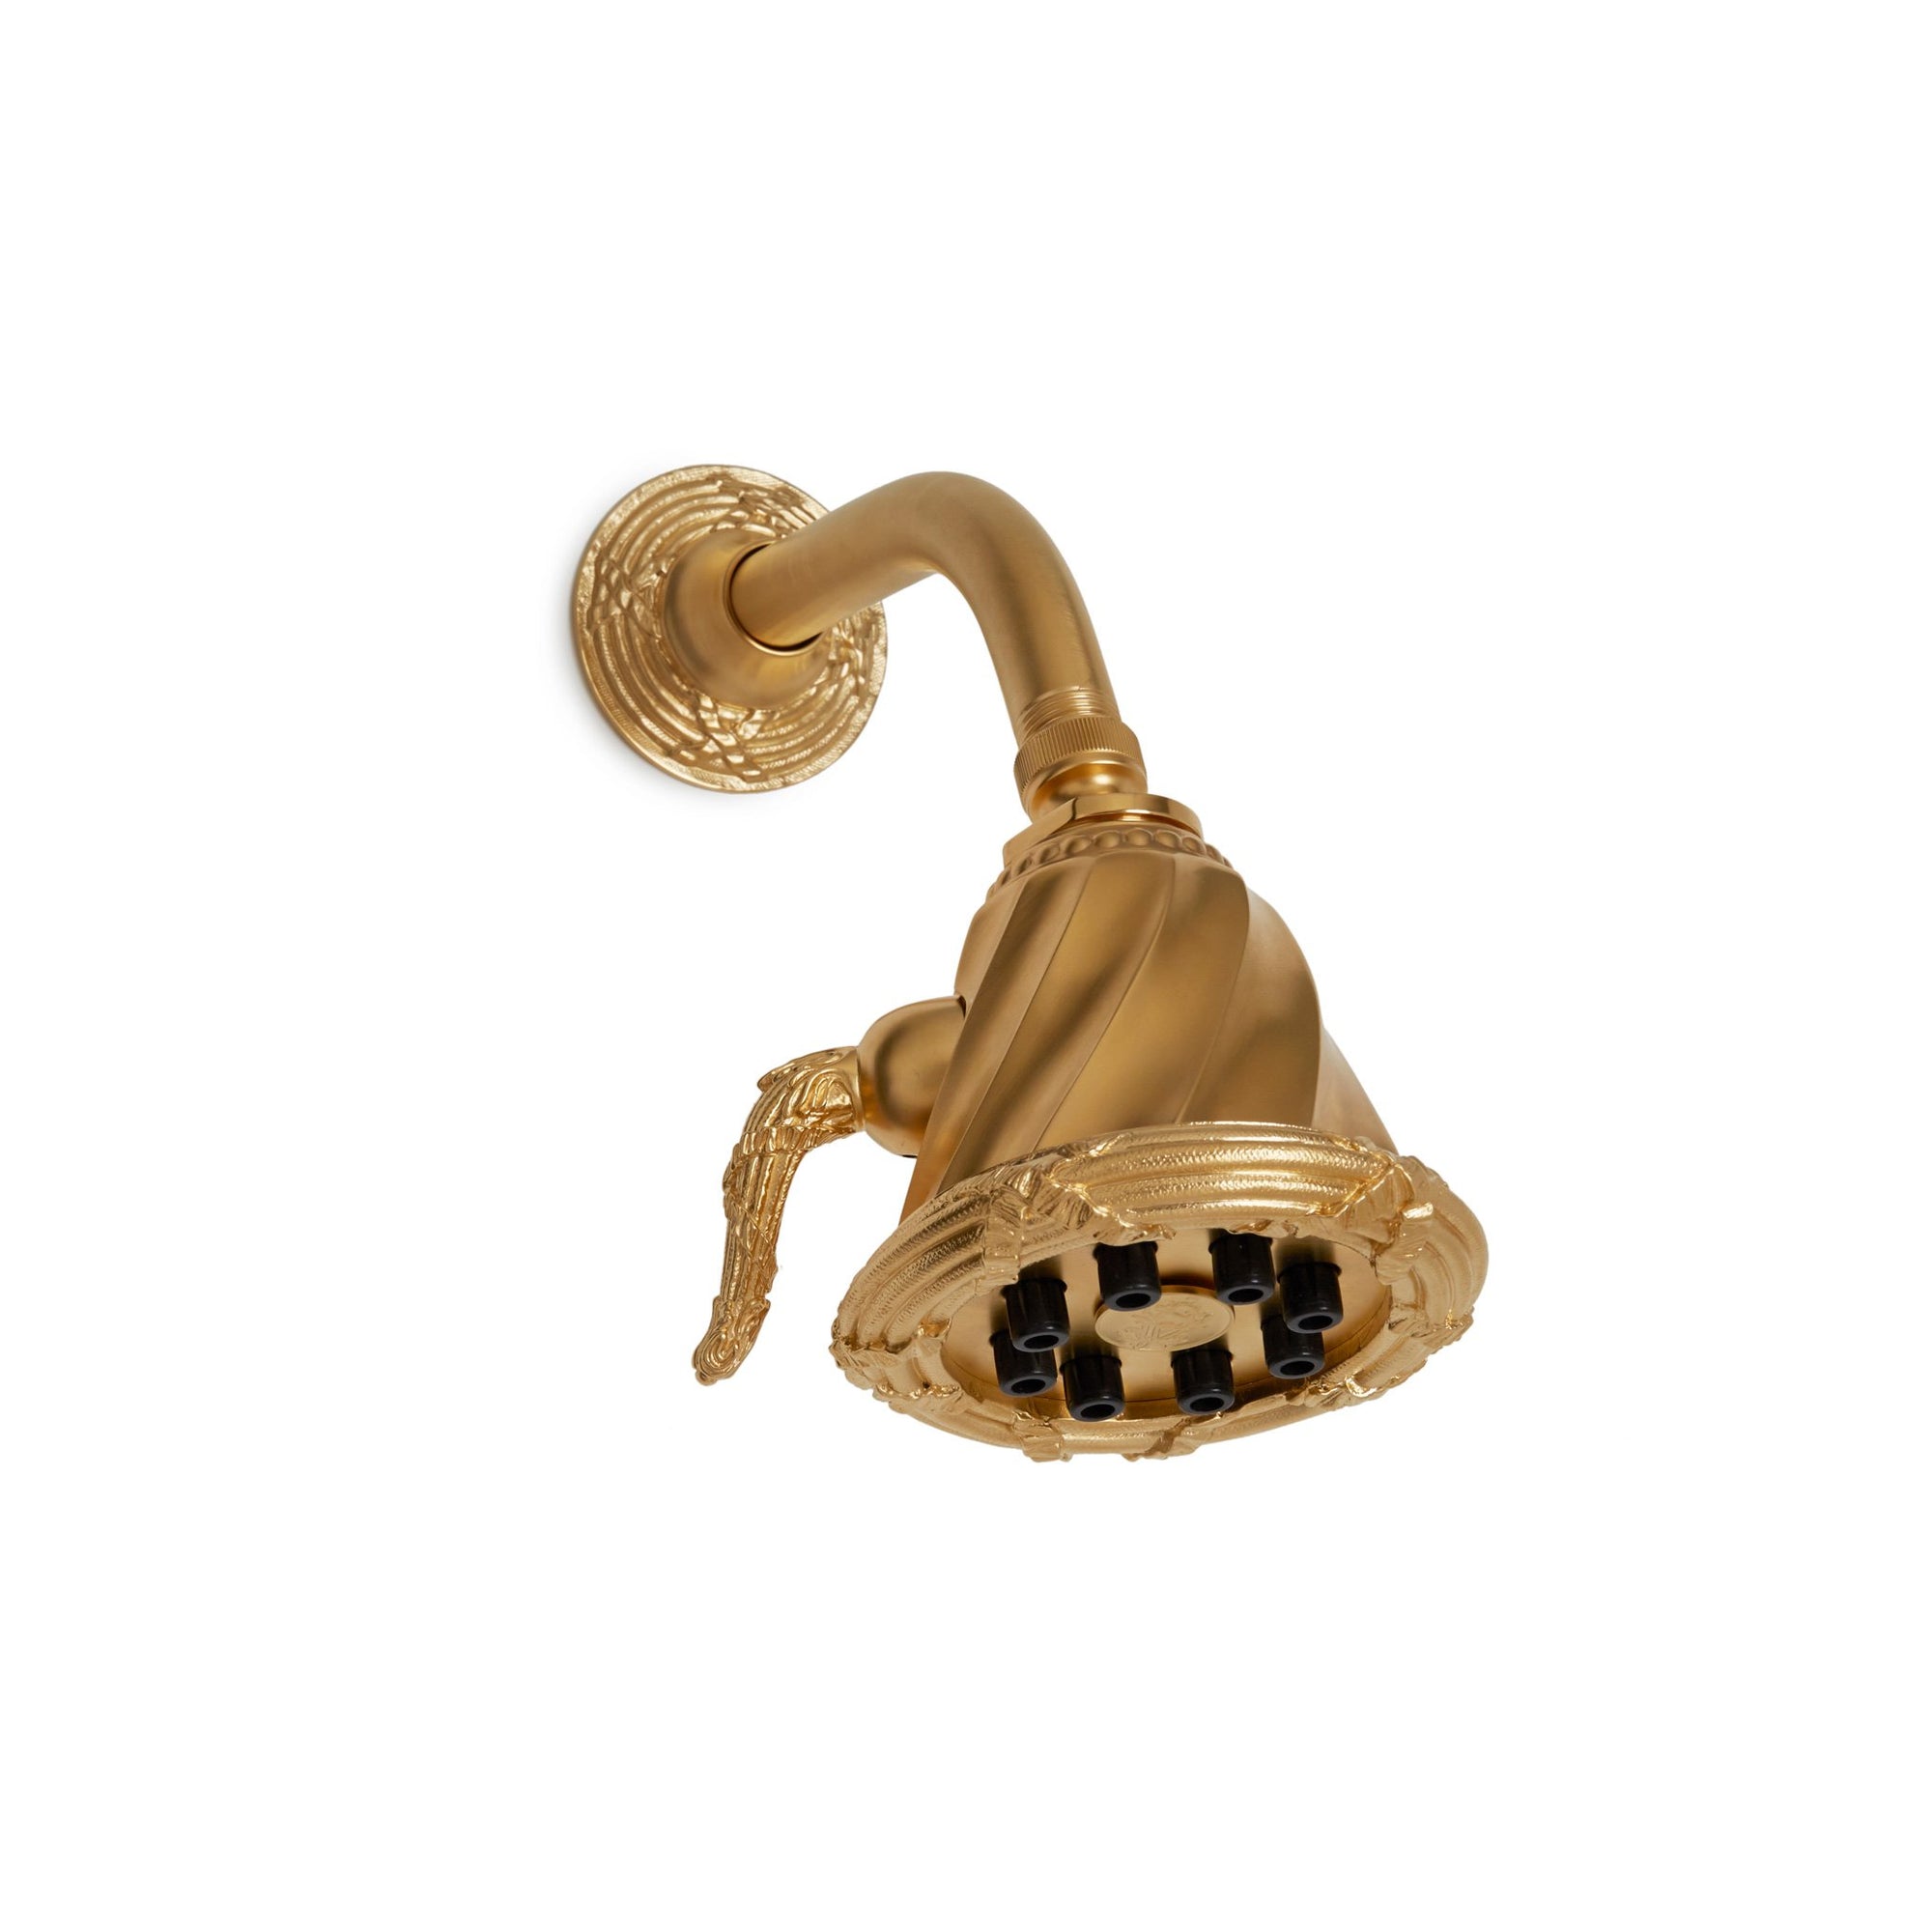 0816SHHD-GP Sherle Wagner International Ribbon & Reed Shower Head with Ribbon & Reed Flange in Gold Plate metal finish